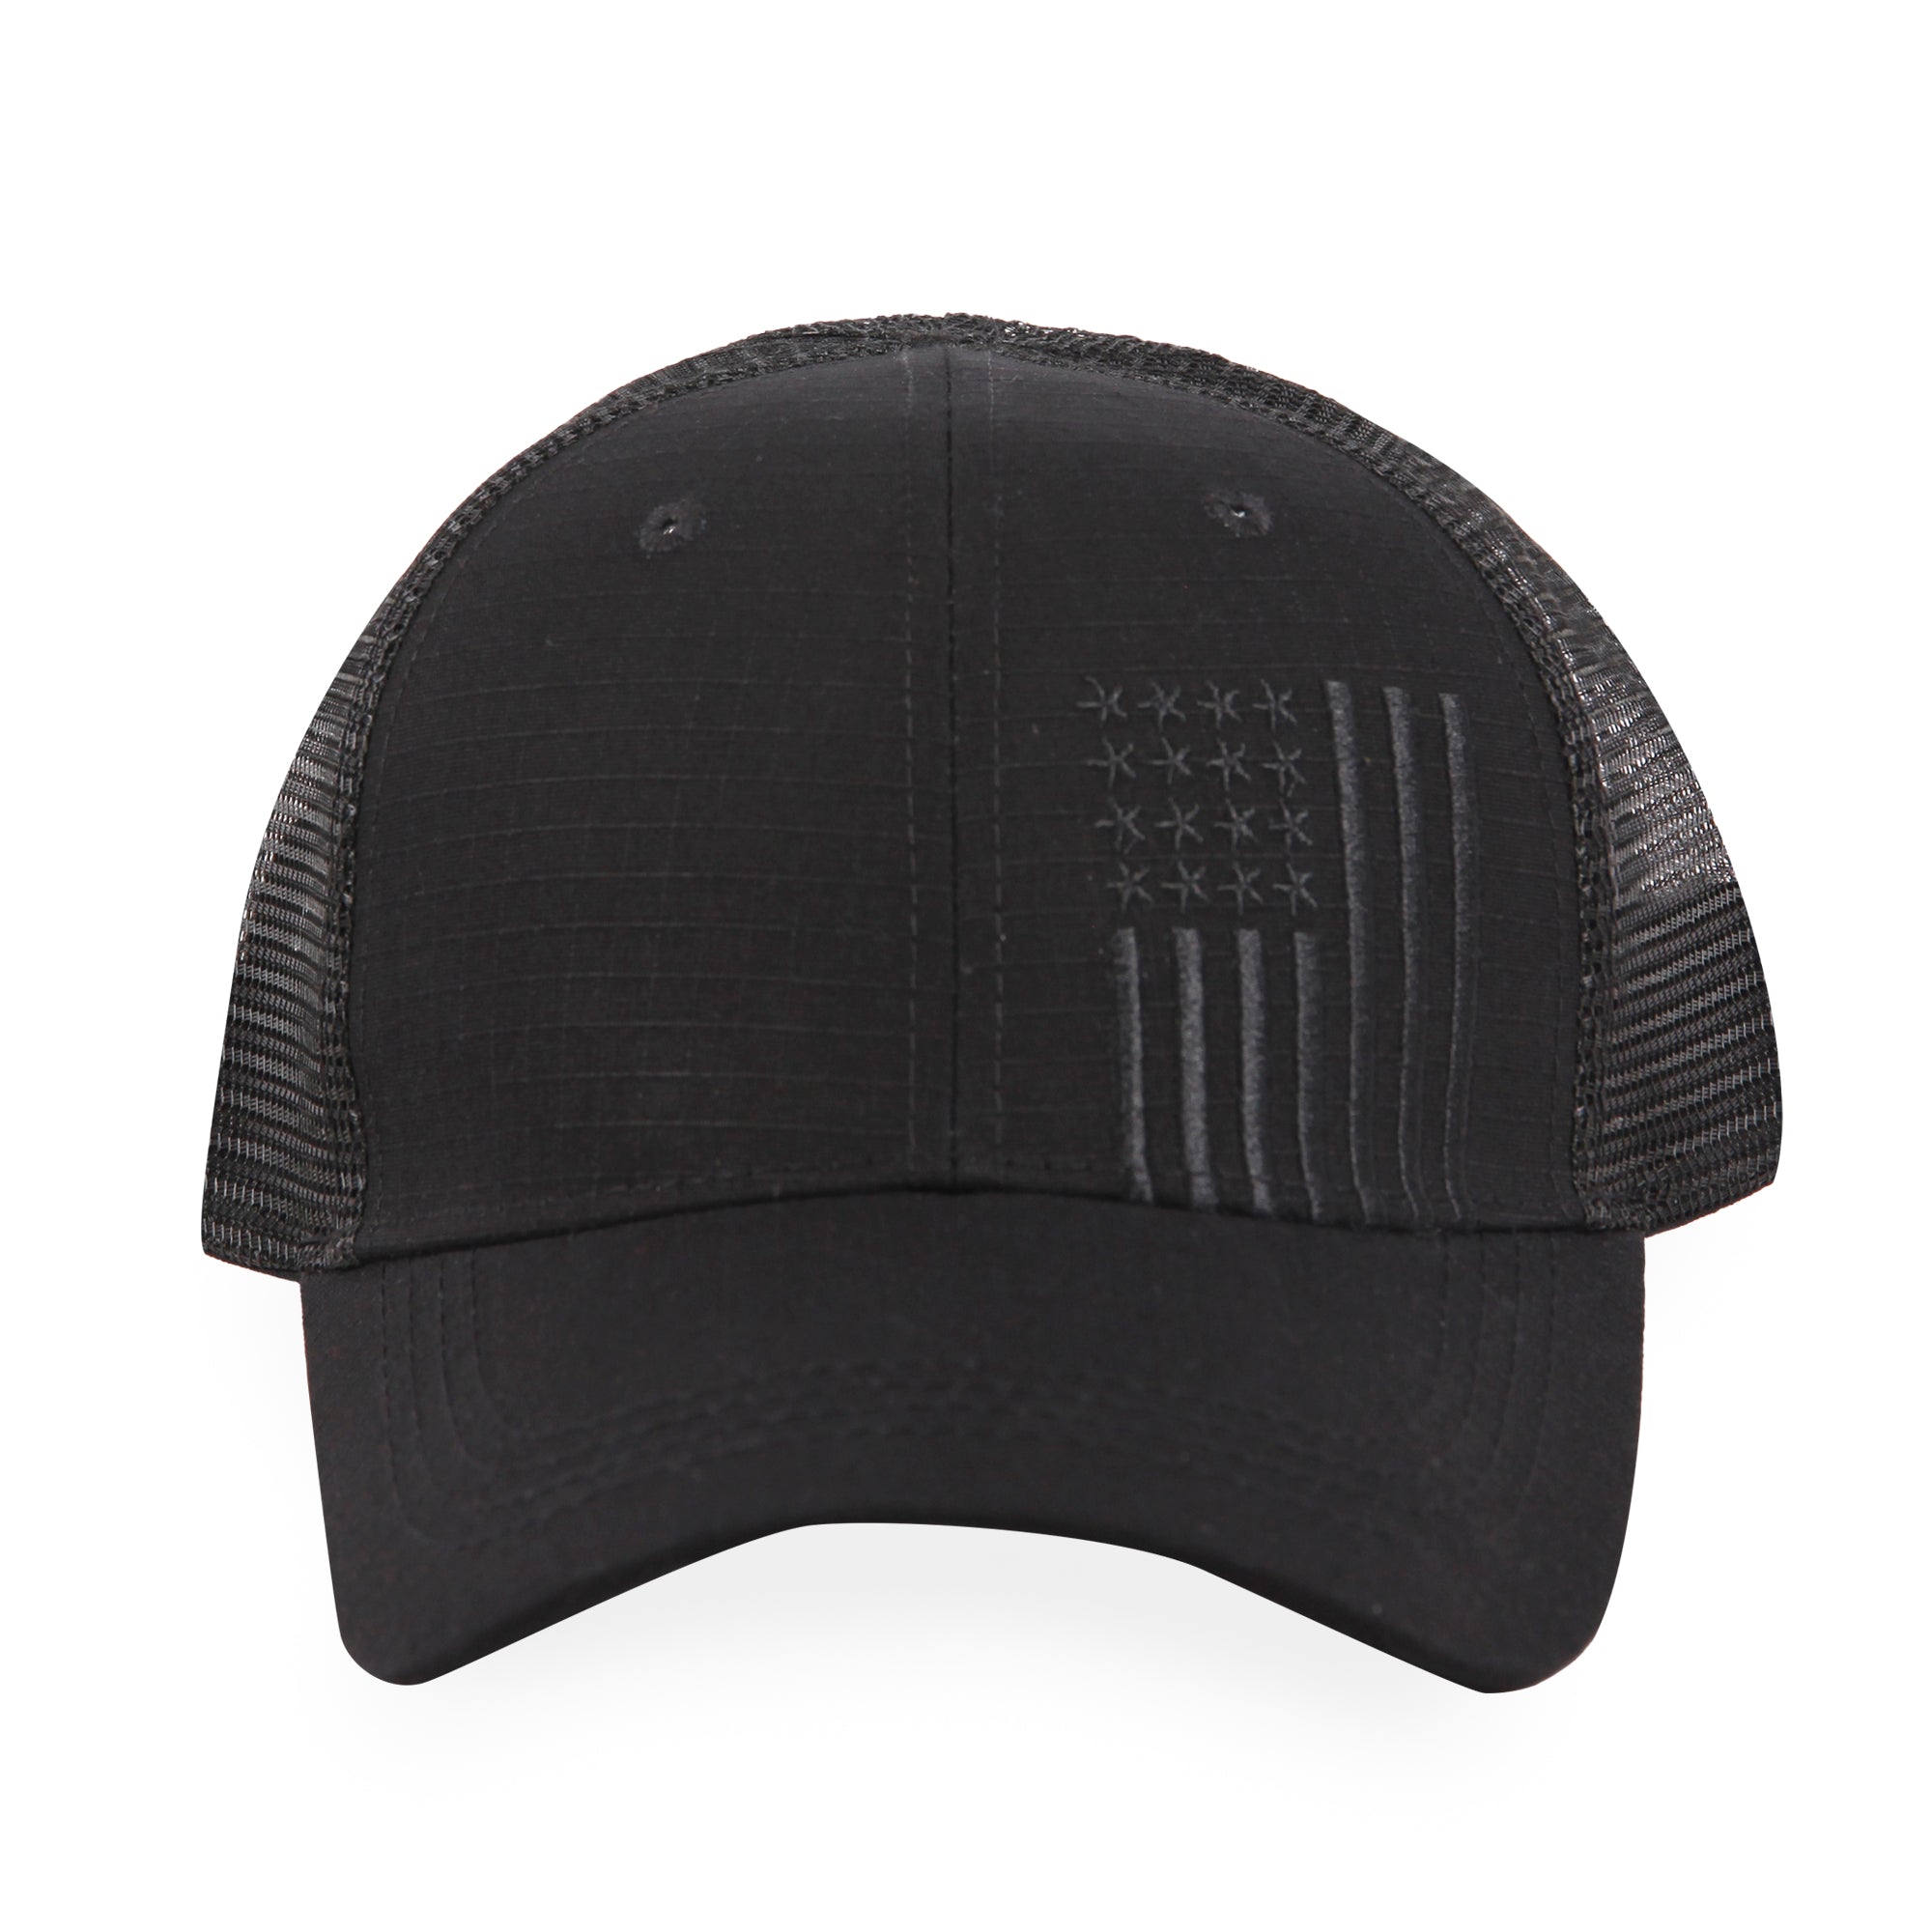 Embroidered American Flag - Trucker Mesh Hat